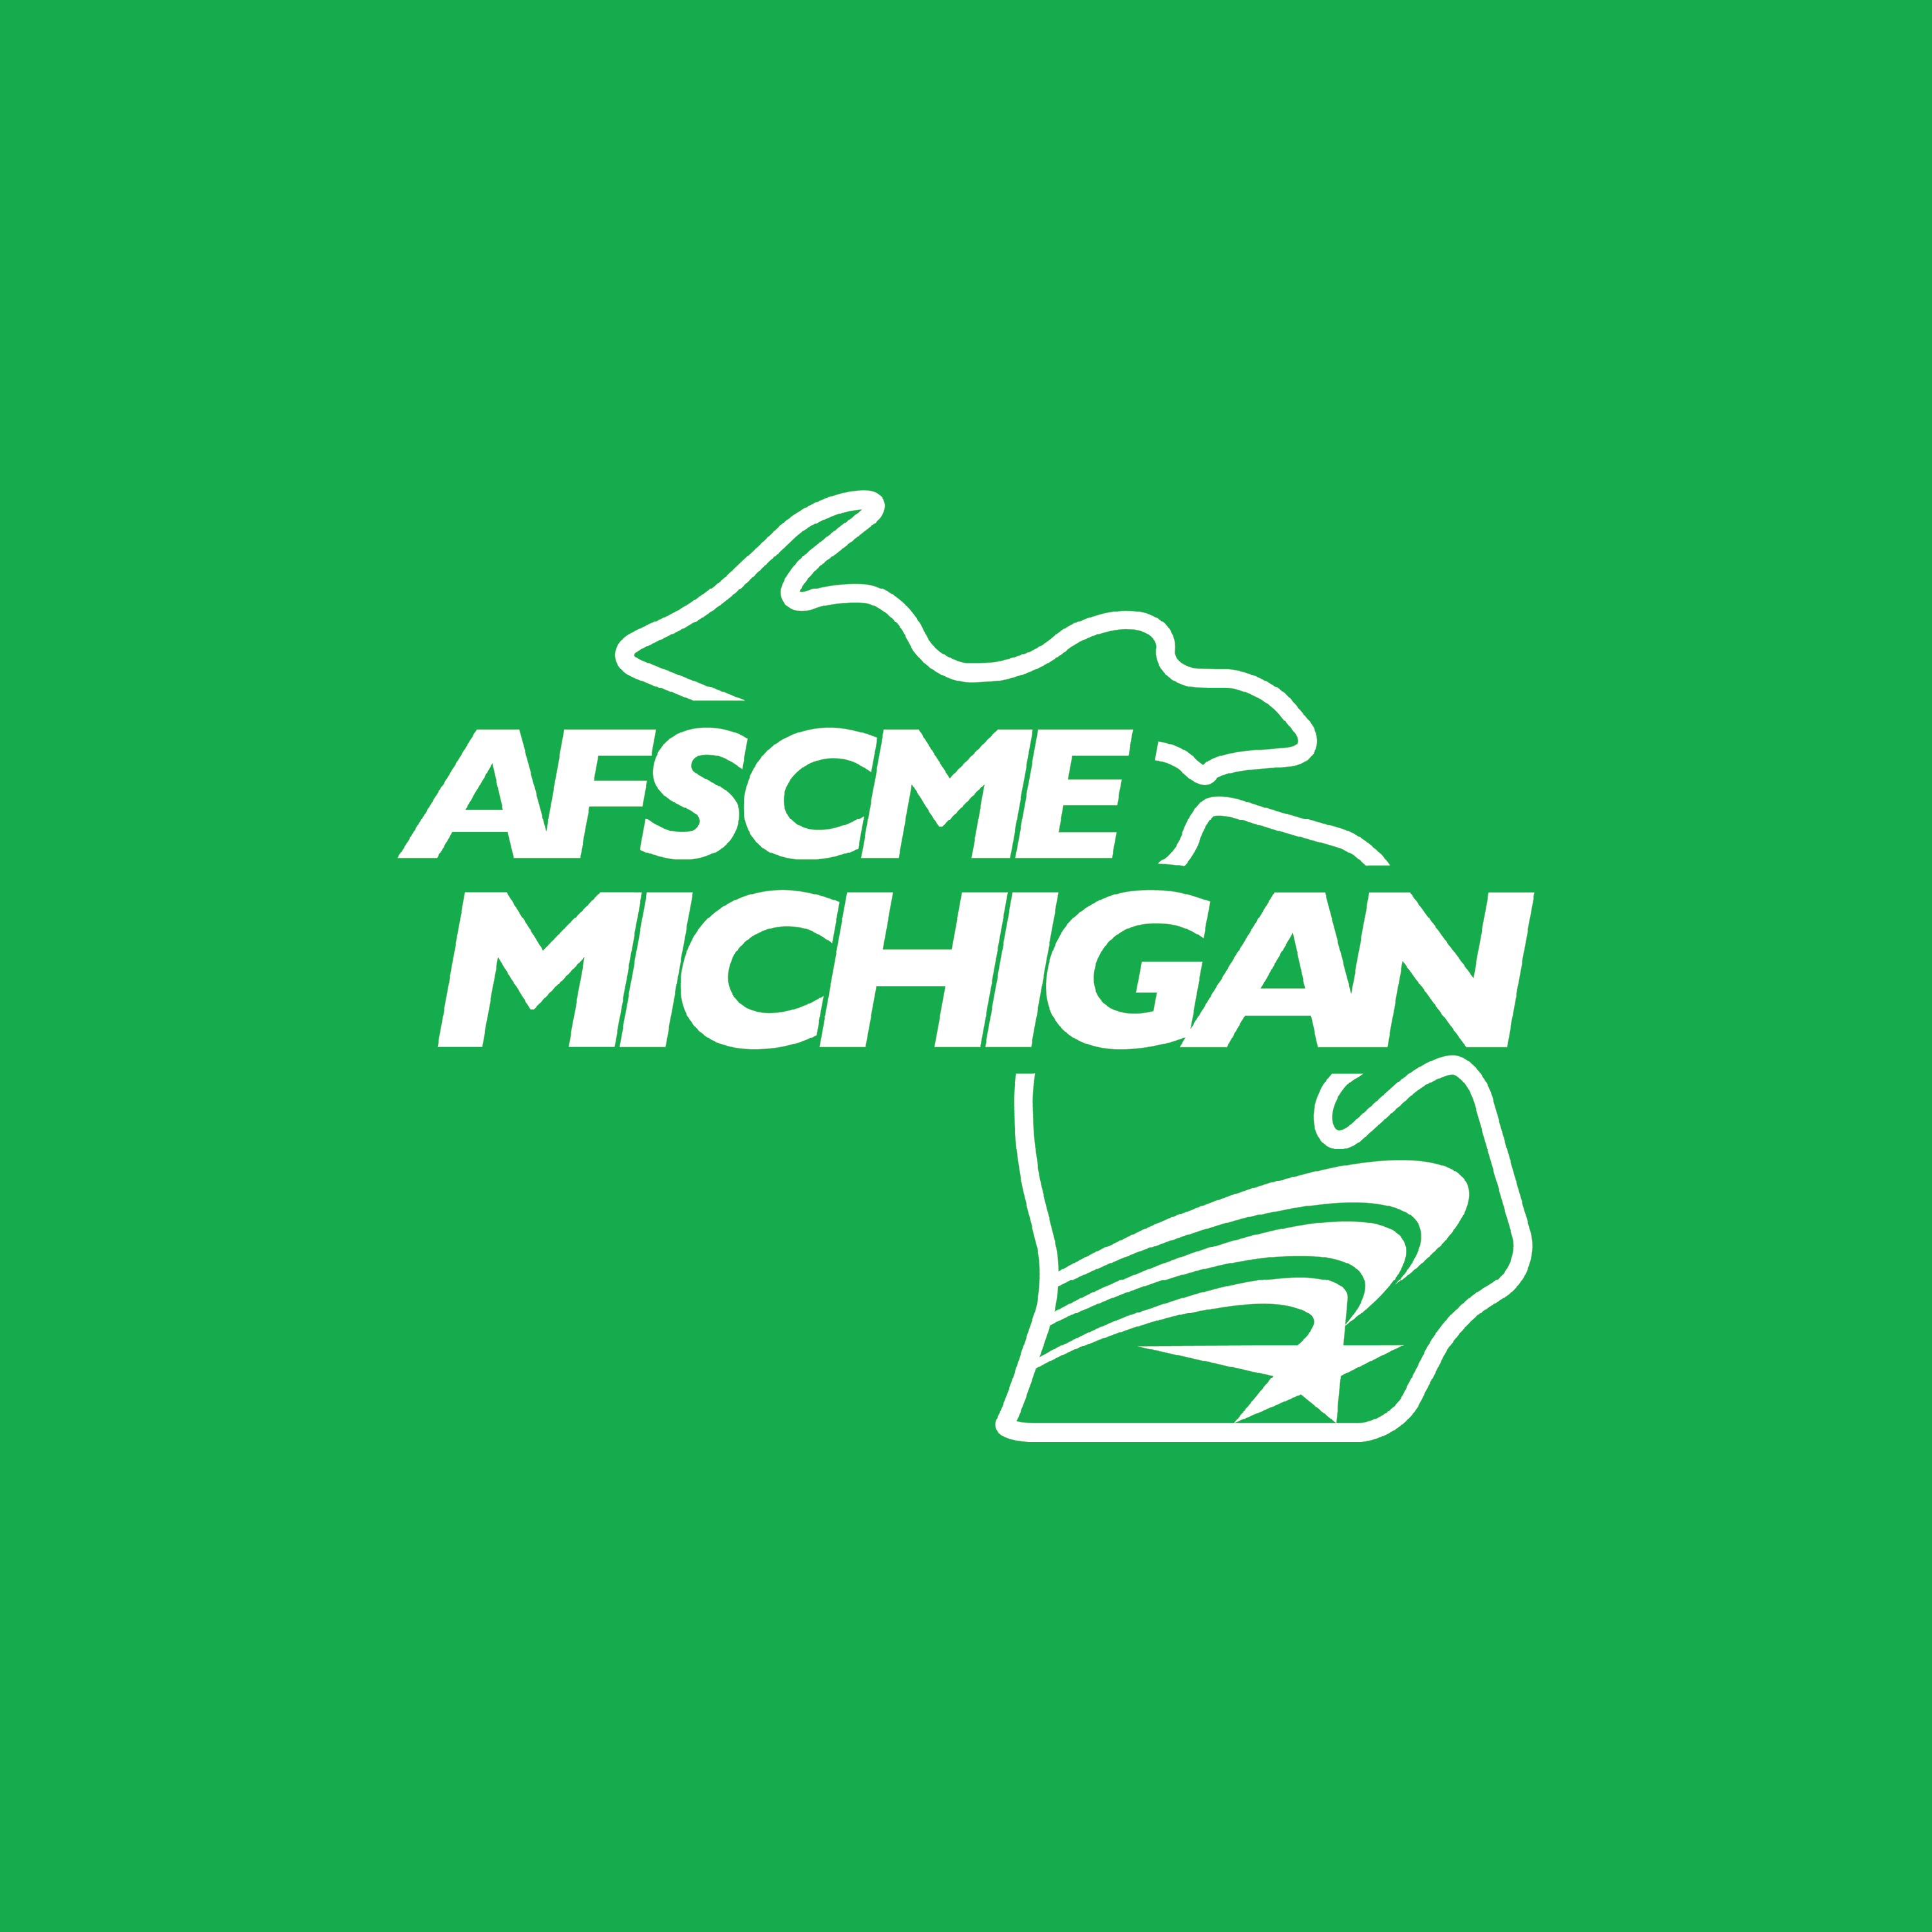 AFSCME Michigan 925 logo in white on green field